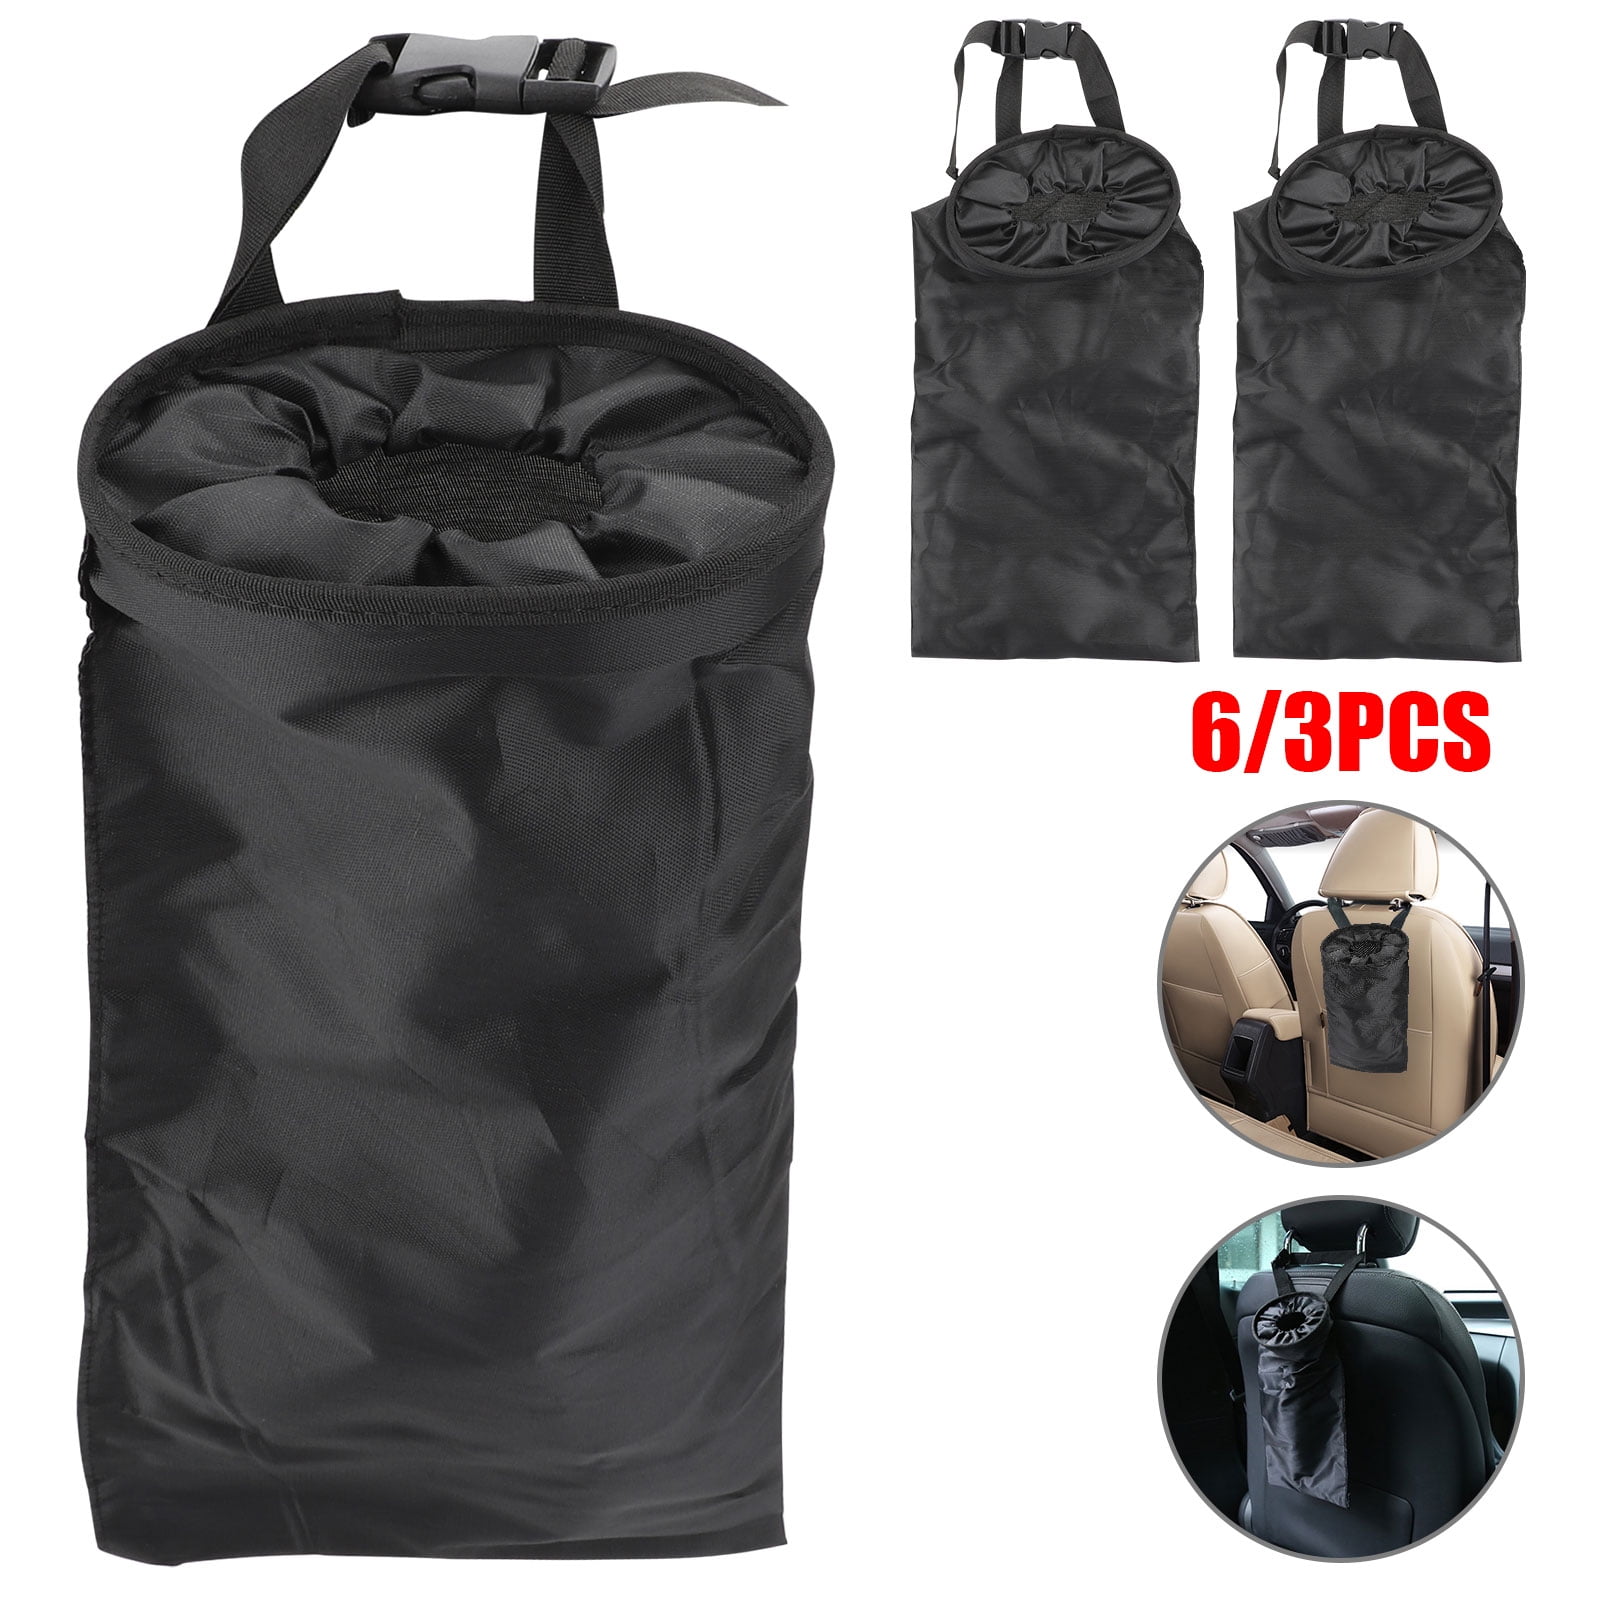 Travelling Vehicle ZYTC Company 4350405138 Home Outdoor ZYTC Car Trash Bags Black Washable Portable Eco-Friendly Back Seat Hanging Headrest Truck Litter Garbage Bag Can for Car 